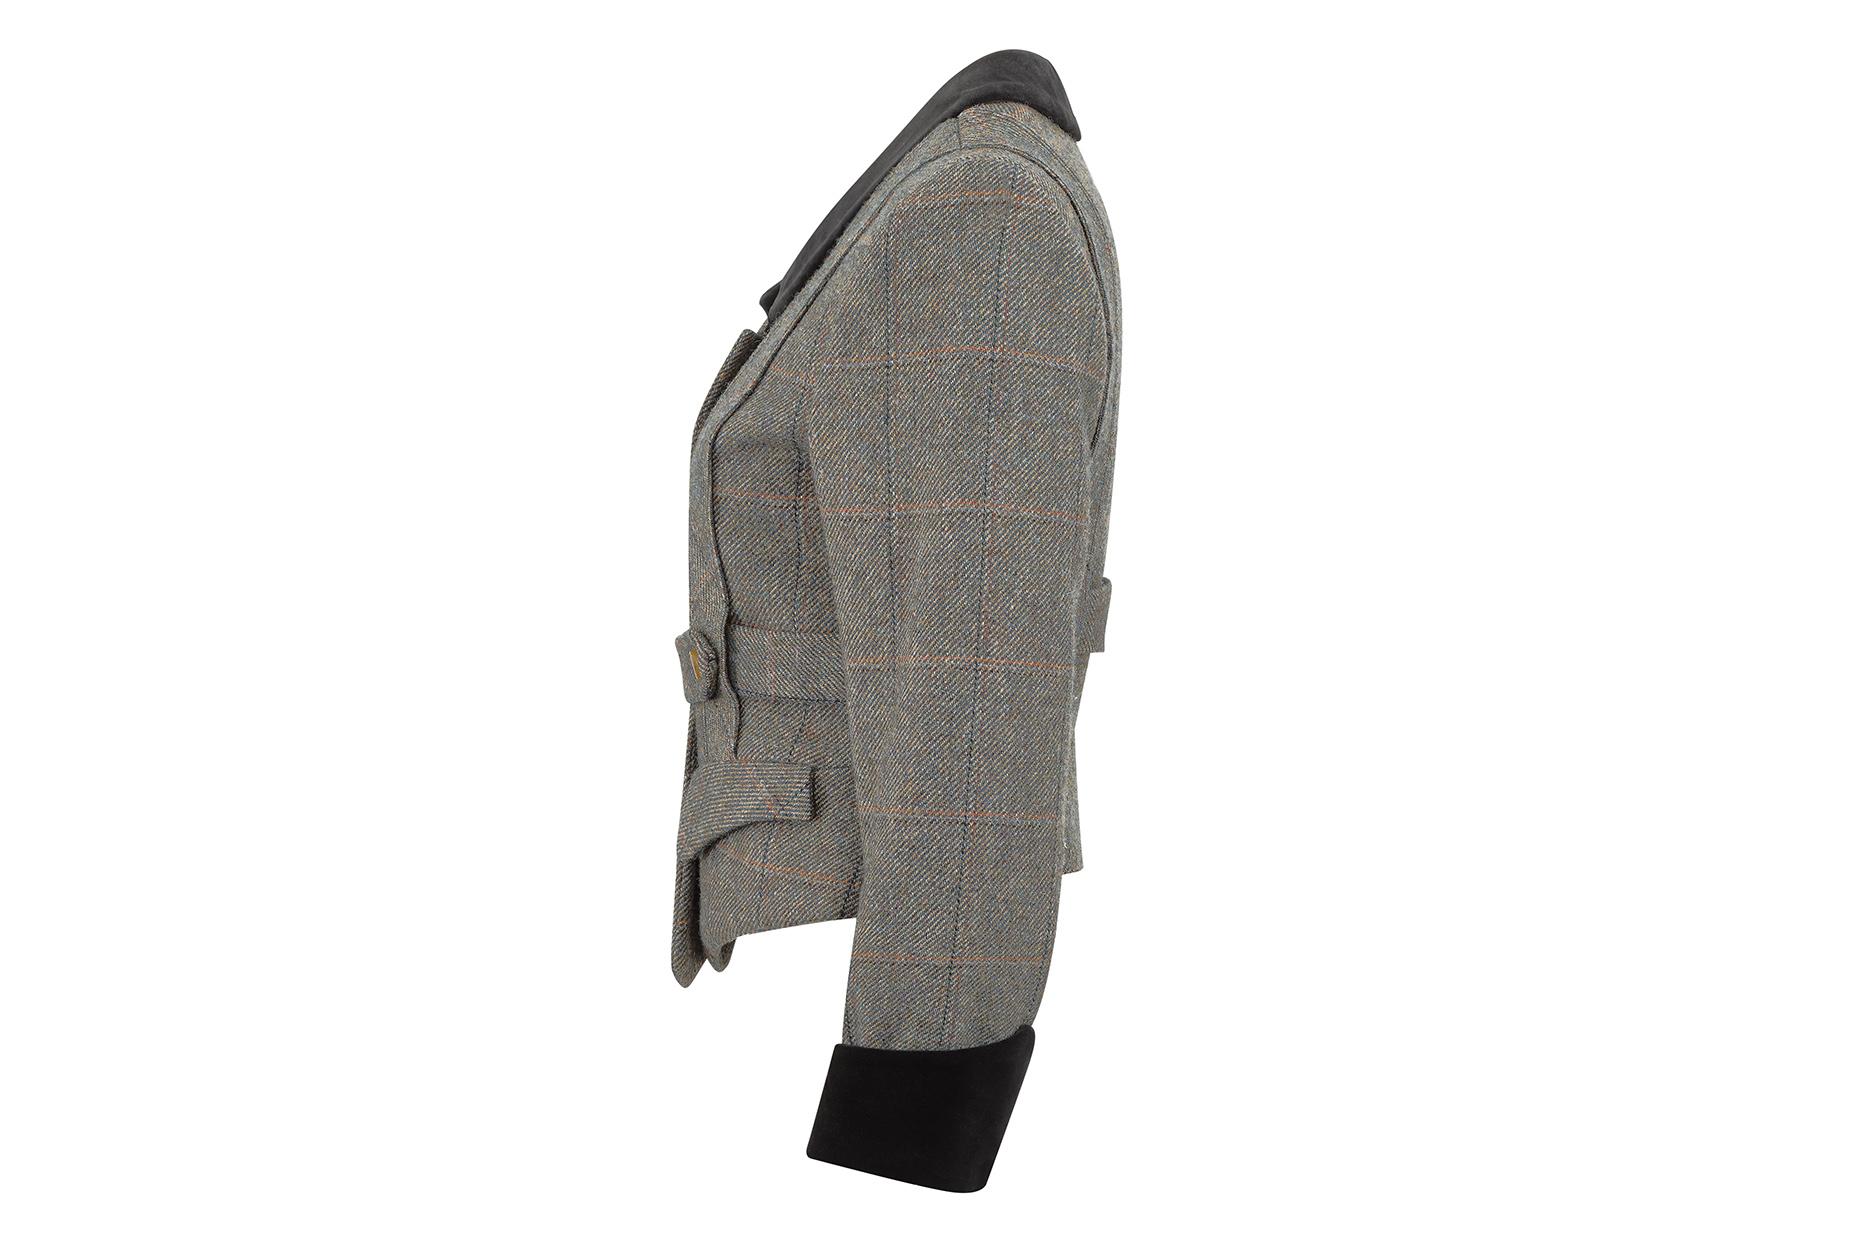 This desirable 1980s Harris tweed jacket with velvet trim is unmistakably Vivienne Westwood, often extolled as the doyenne of British fashion for her controversial, eccentric, punk-inspired designs. The jacket is part of a skirt and hat ensemble